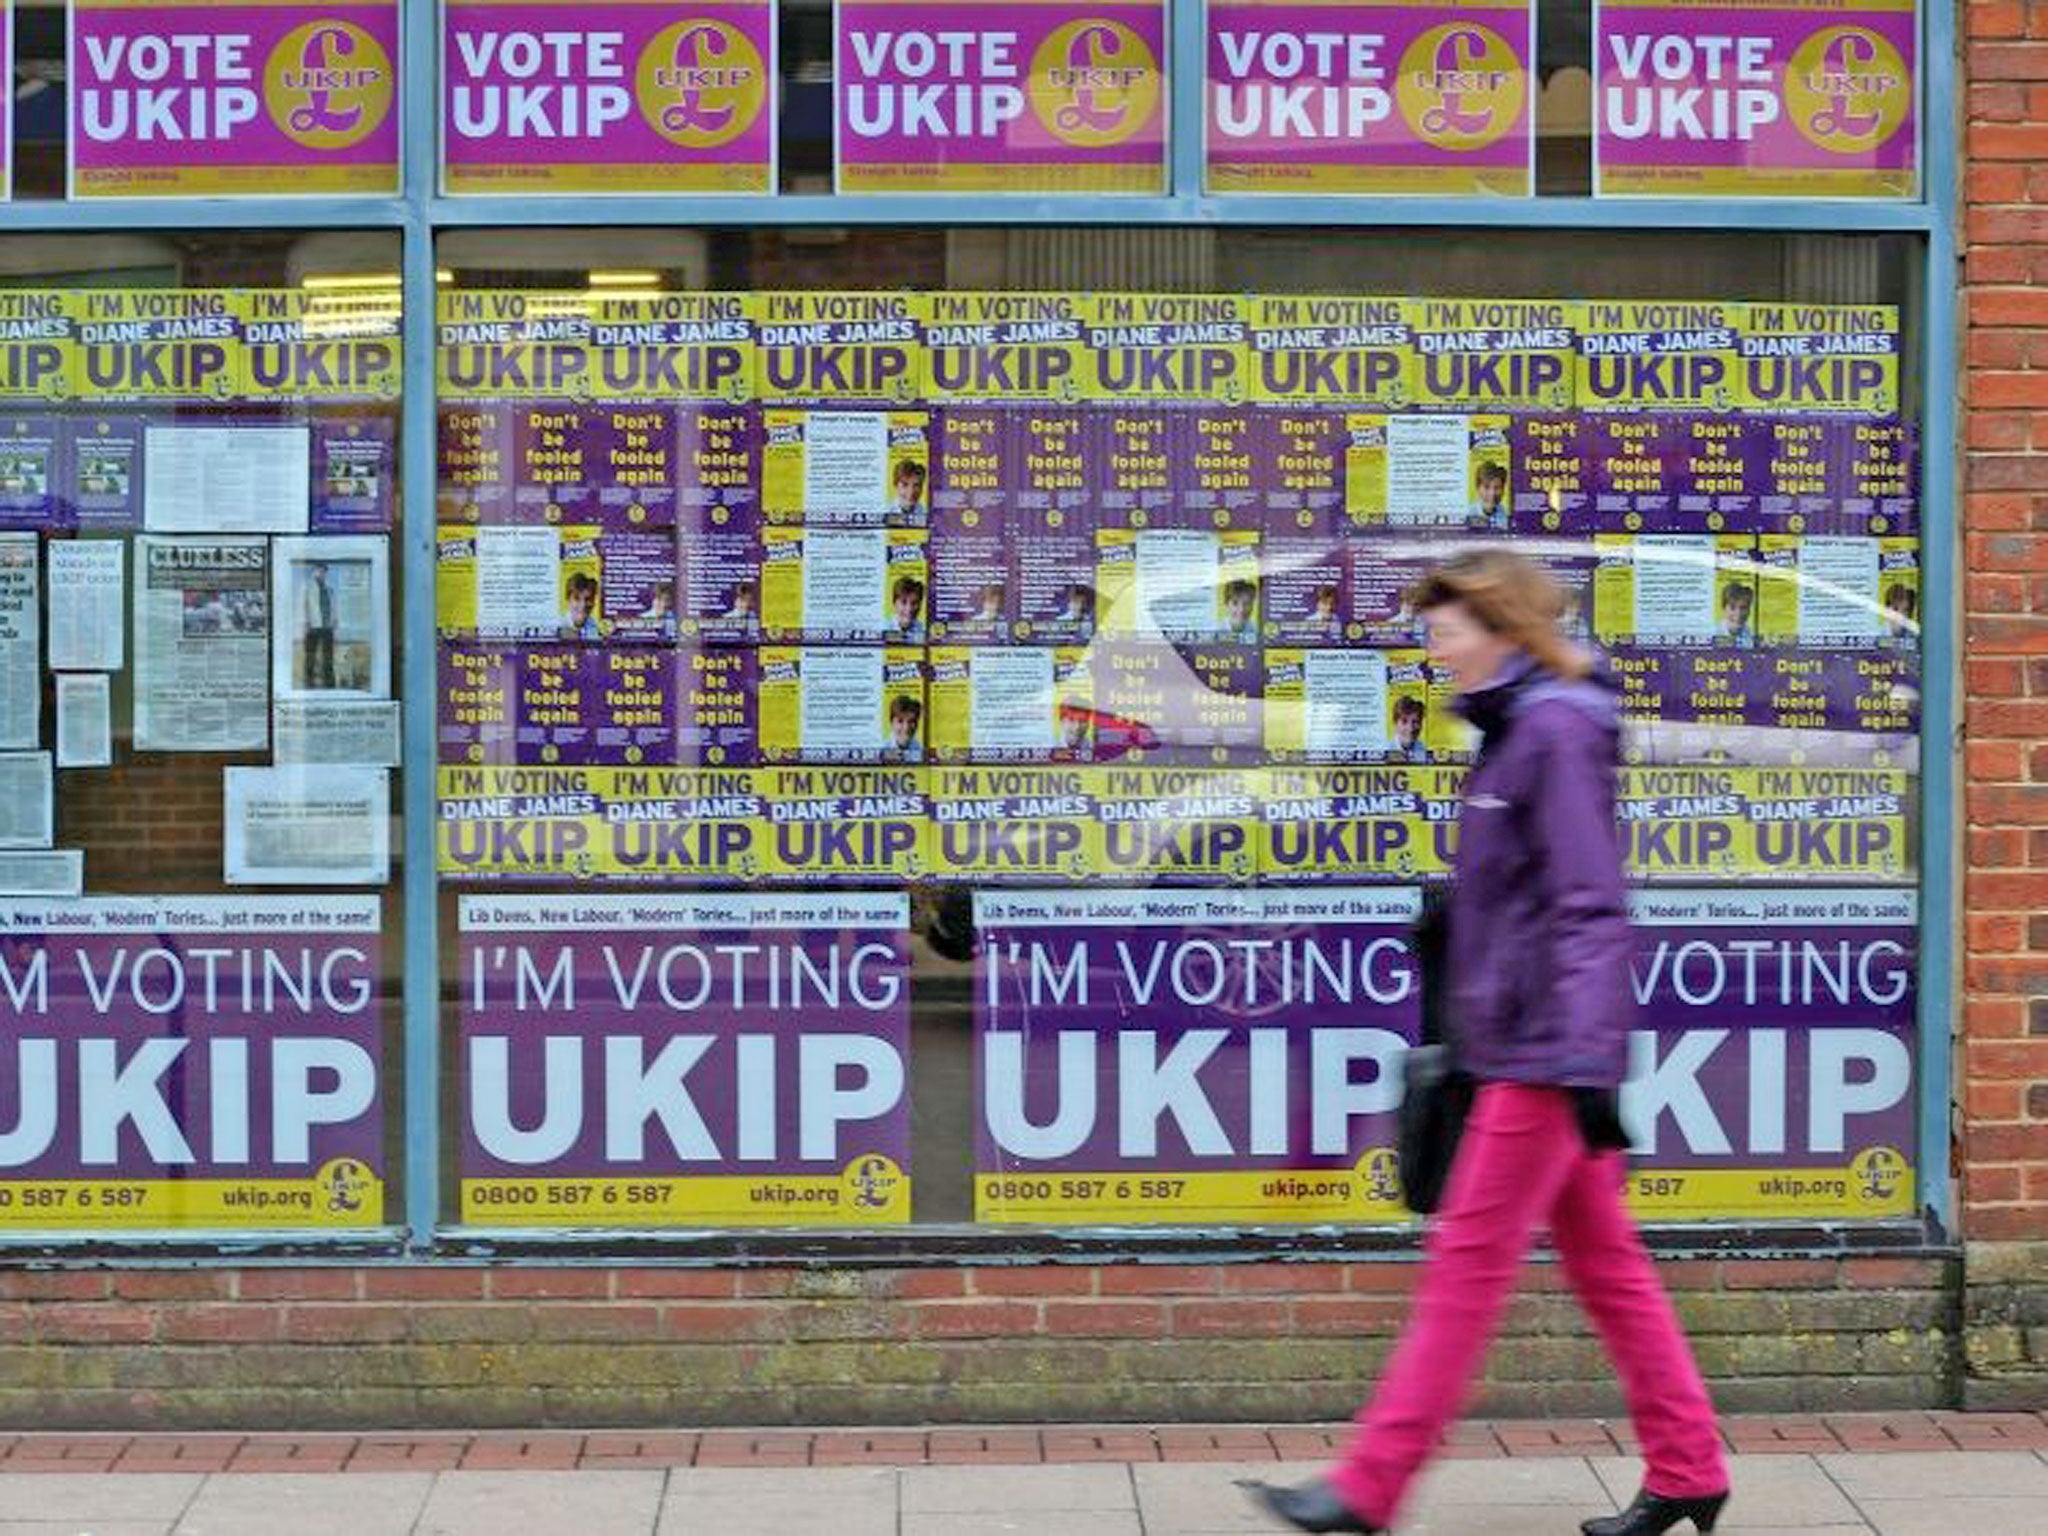 Ukip’s candidate is currently in third place, but right behind the Tories